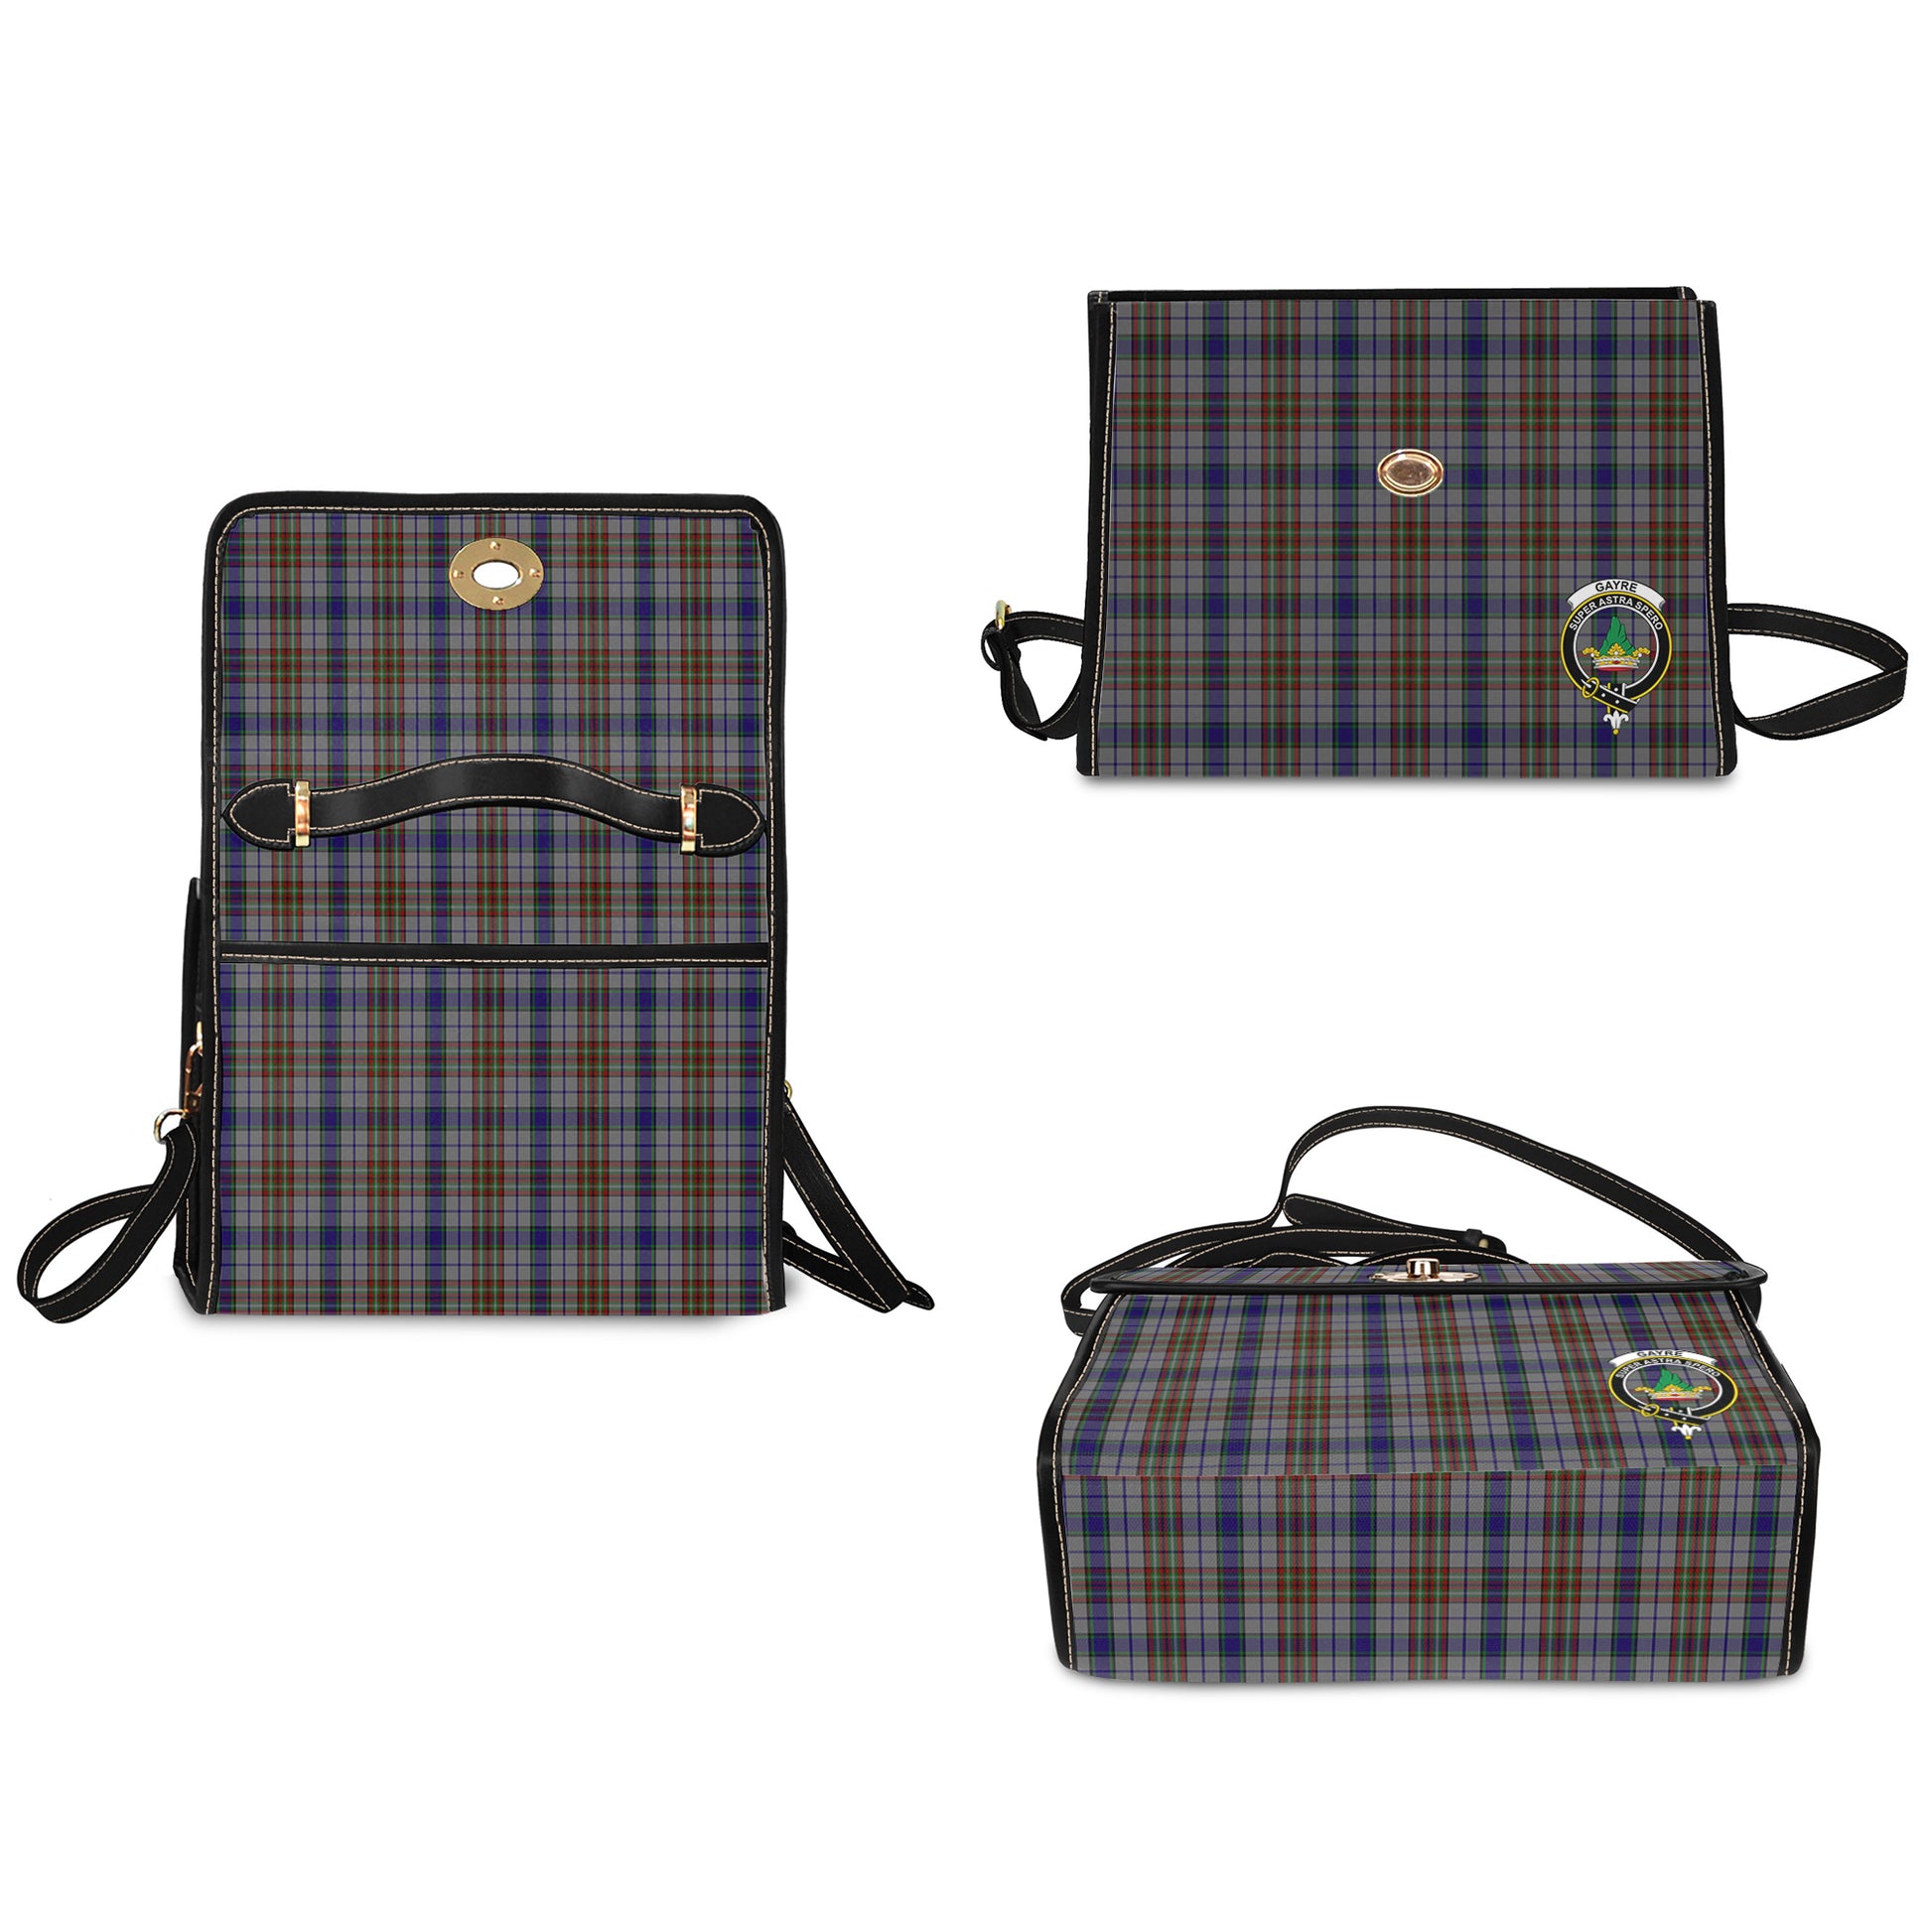 gayre-hunting-tartan-leather-strap-waterproof-canvas-bag-with-family-crest